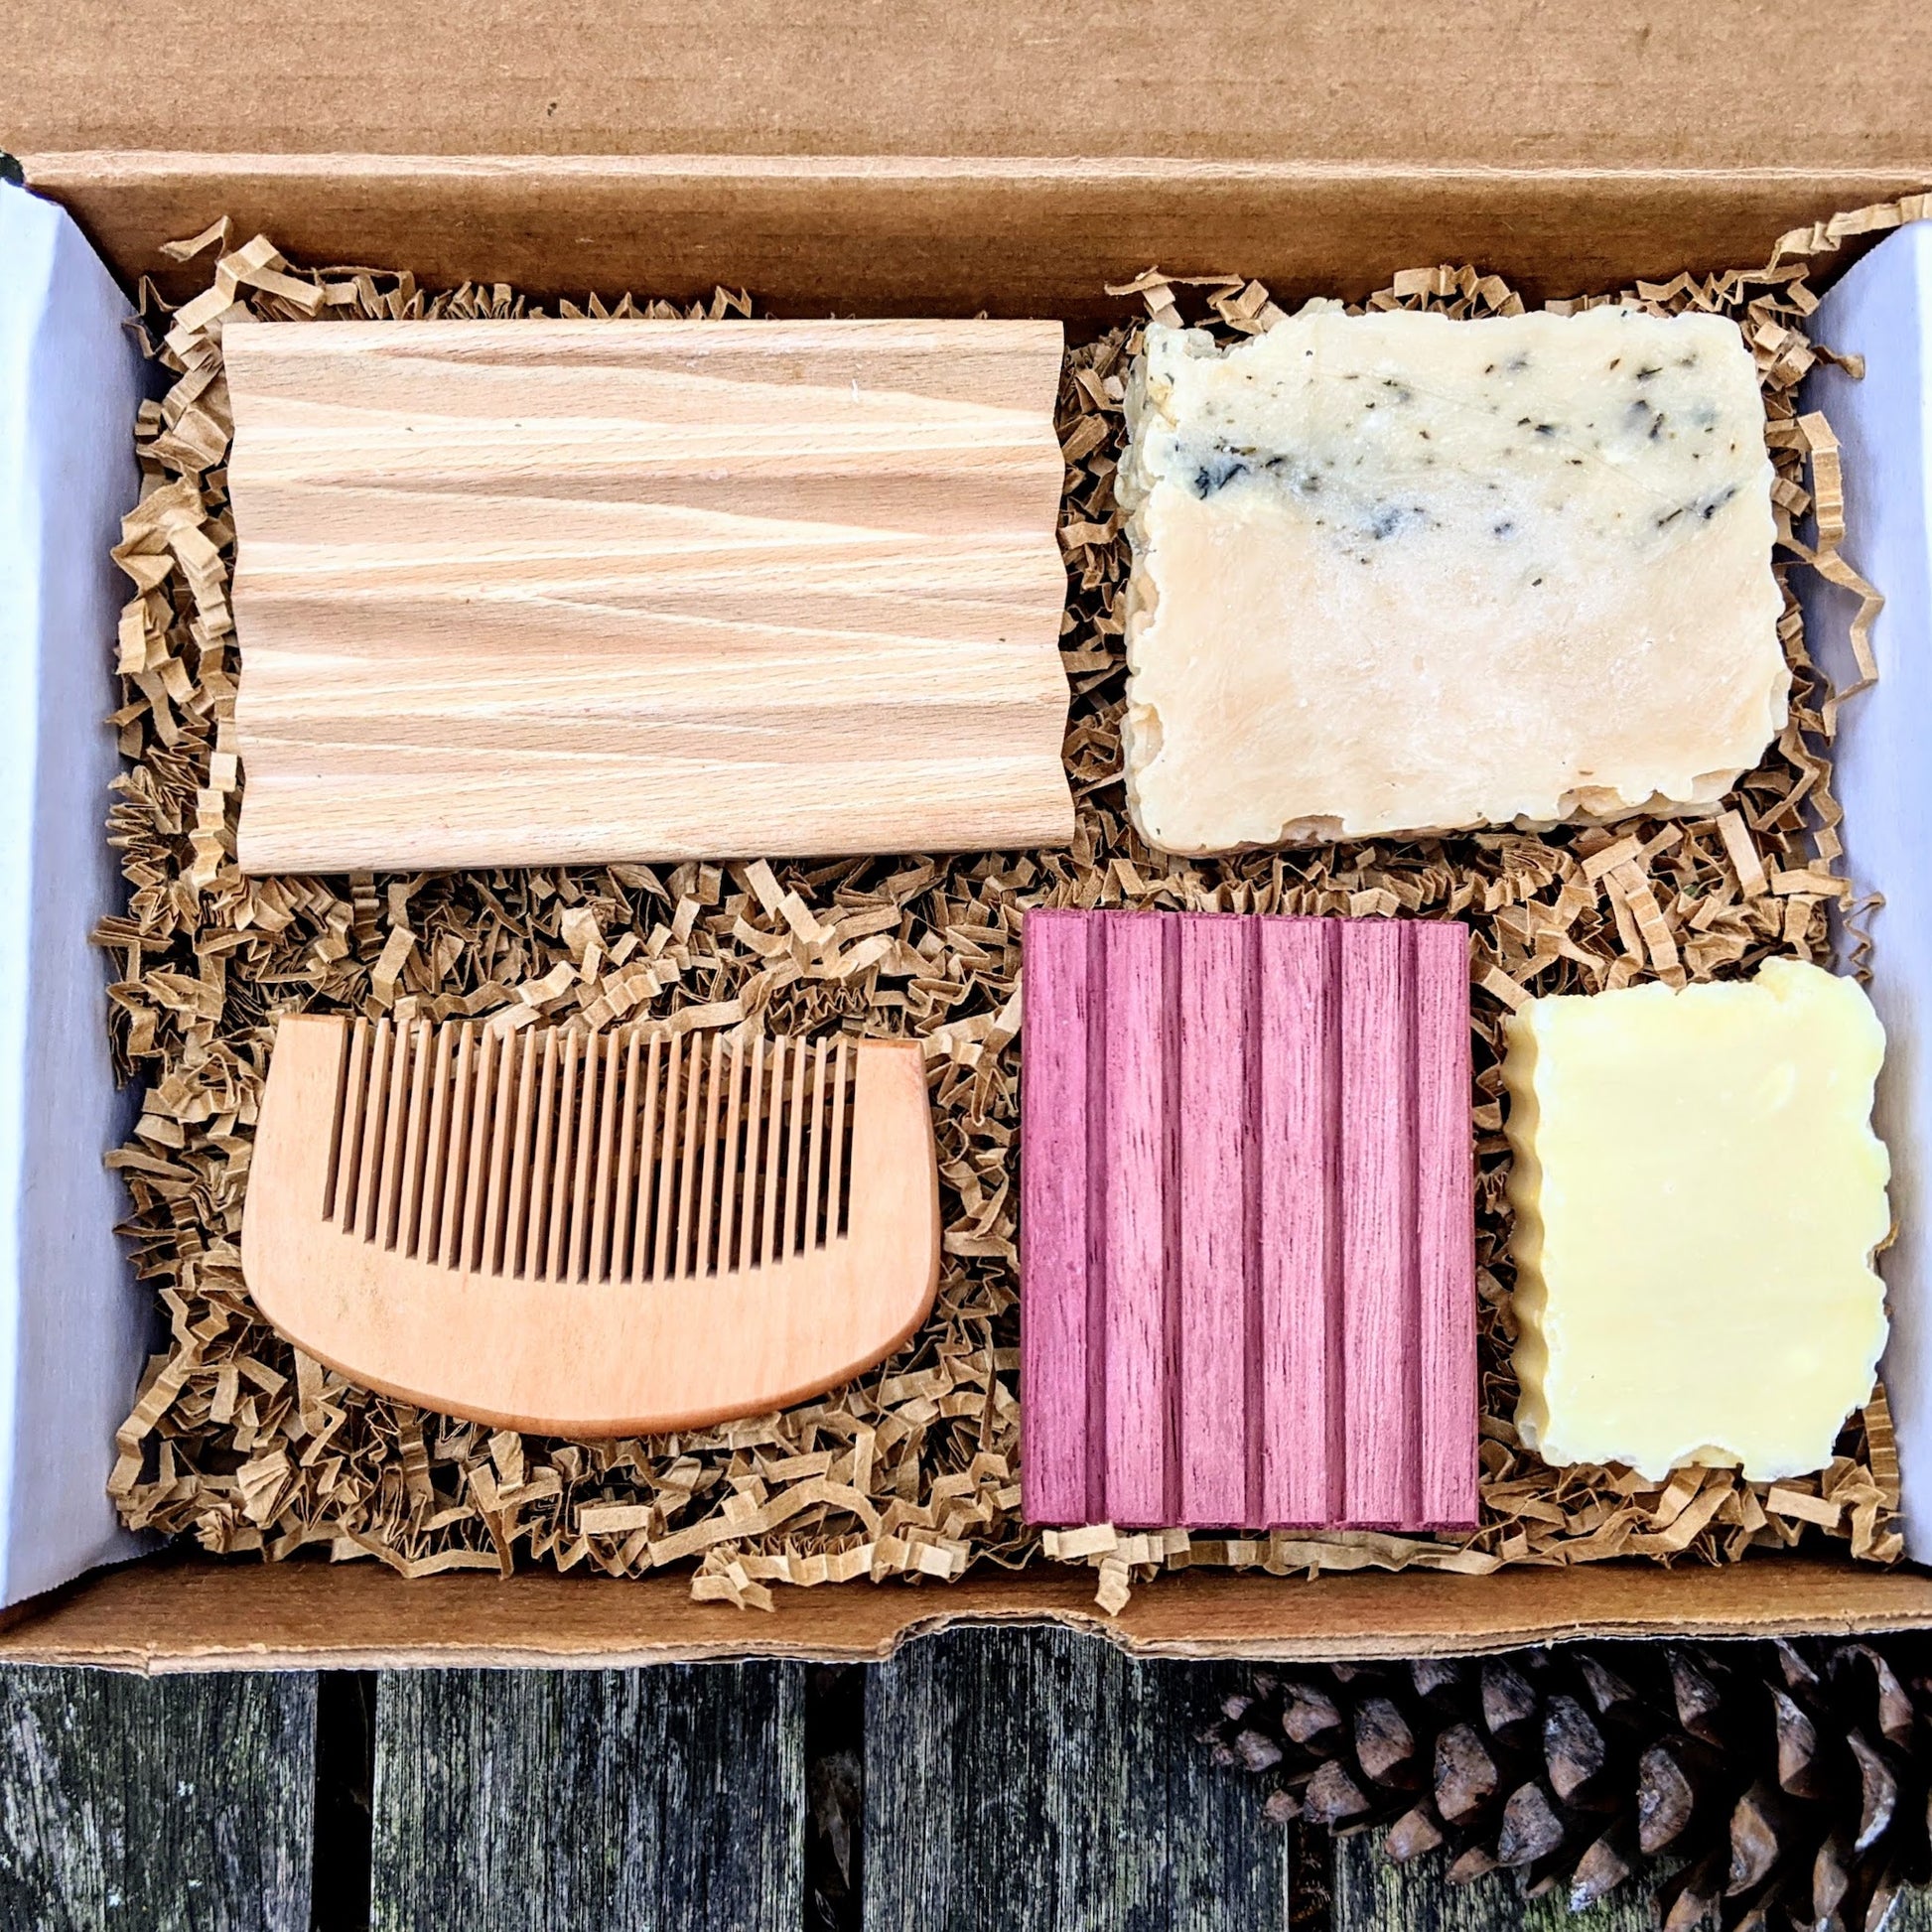 The Beard and Body box has one of our award winning soaps with a beech wood soap dish, a beard soap with a purple heart mini soap dish, and a wooden beard comb.